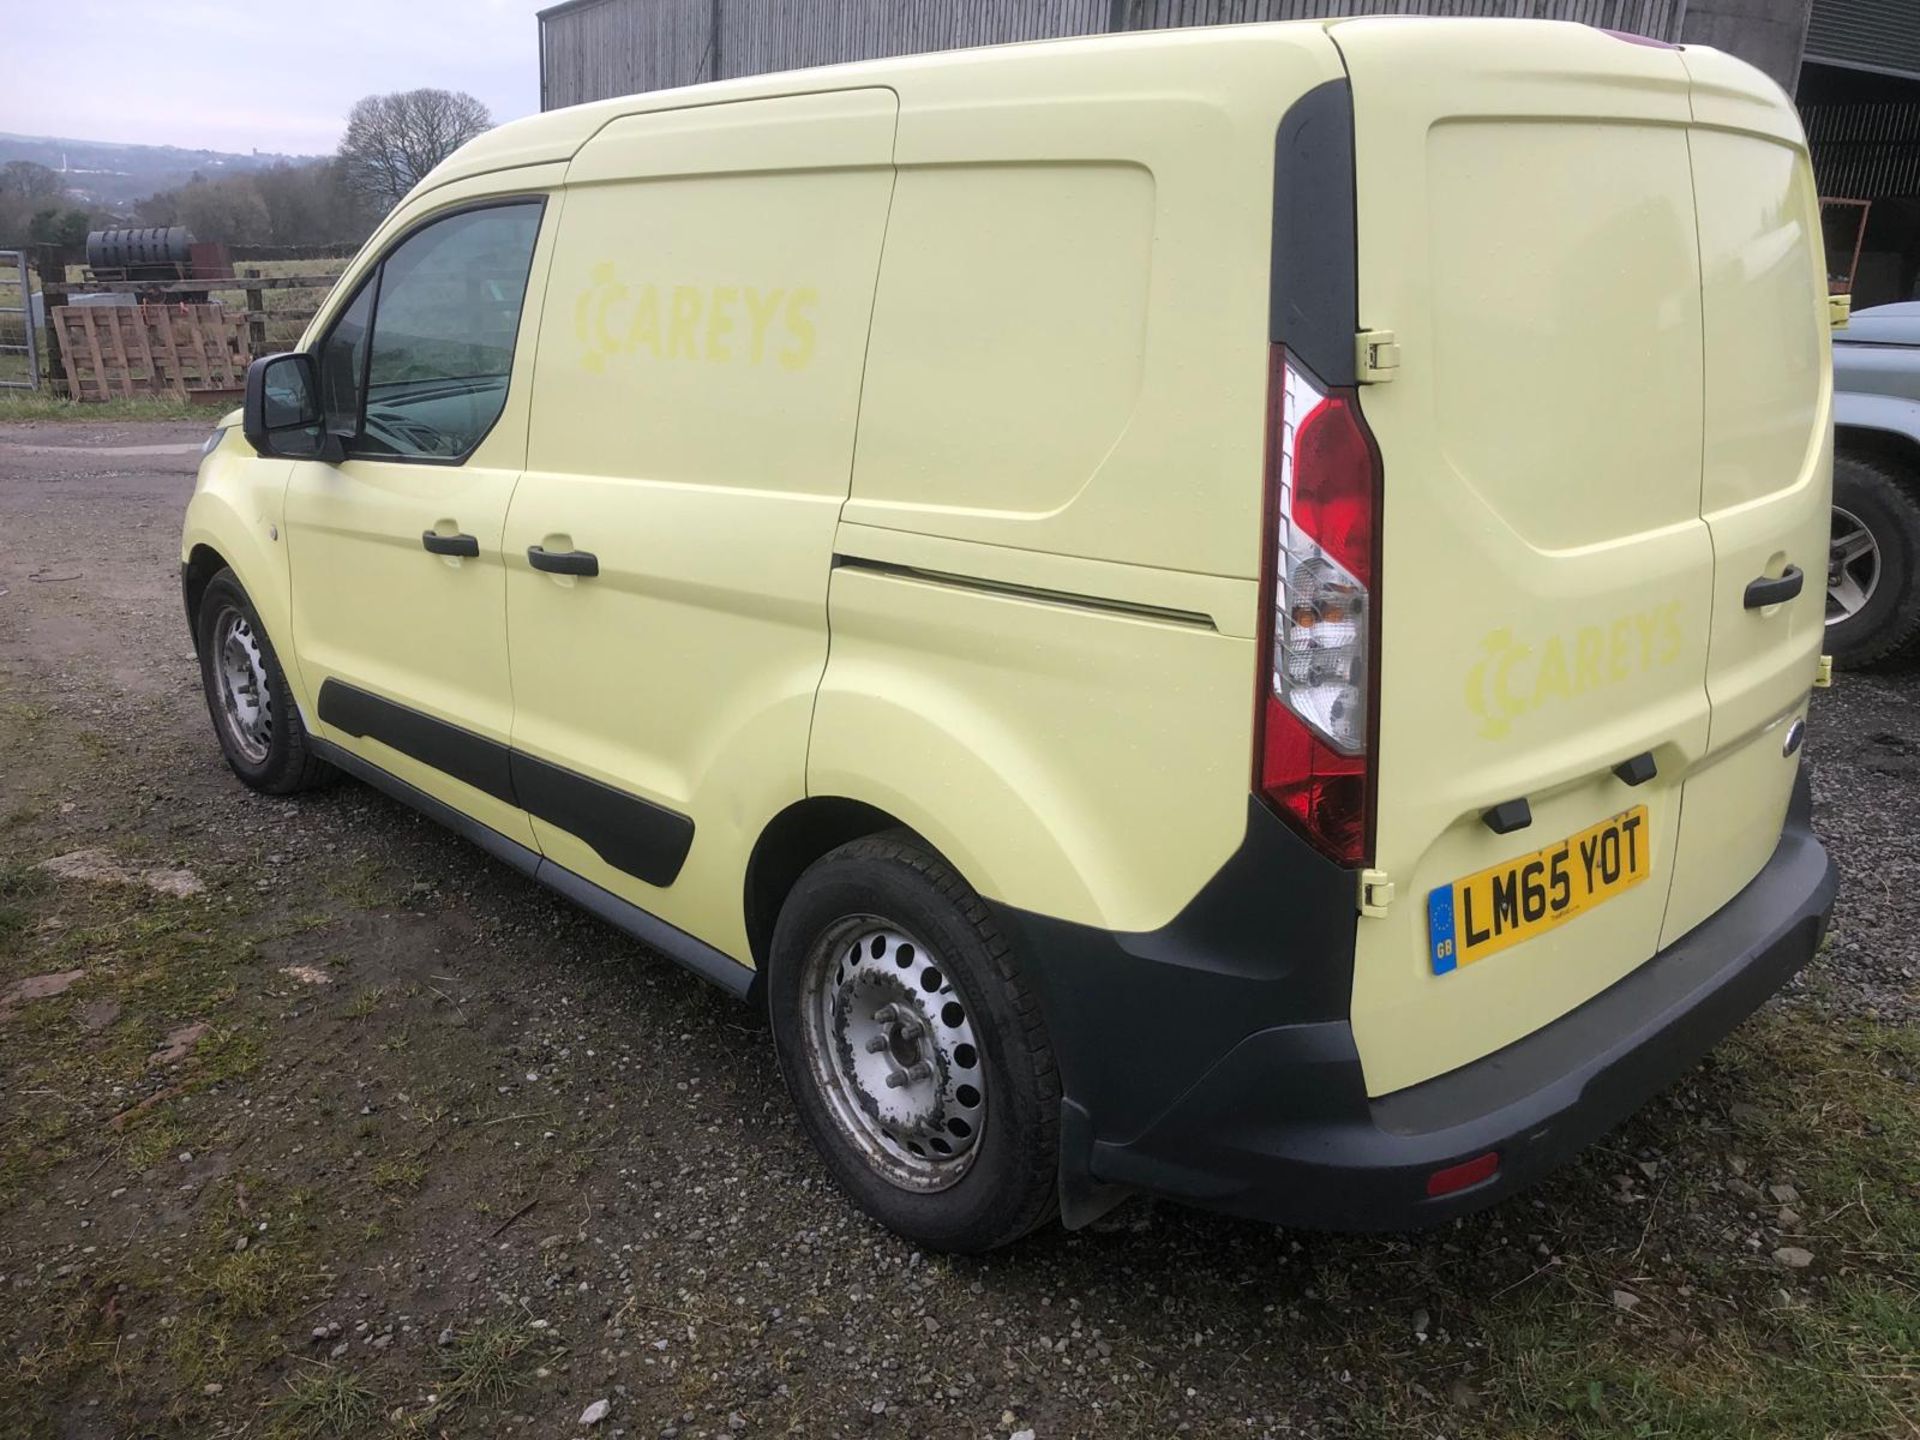 2015 FORD TRANSIT CONNECT 200 PANEL VAN - 1.6 TDCI - 91621 MILES - Image 3 of 15